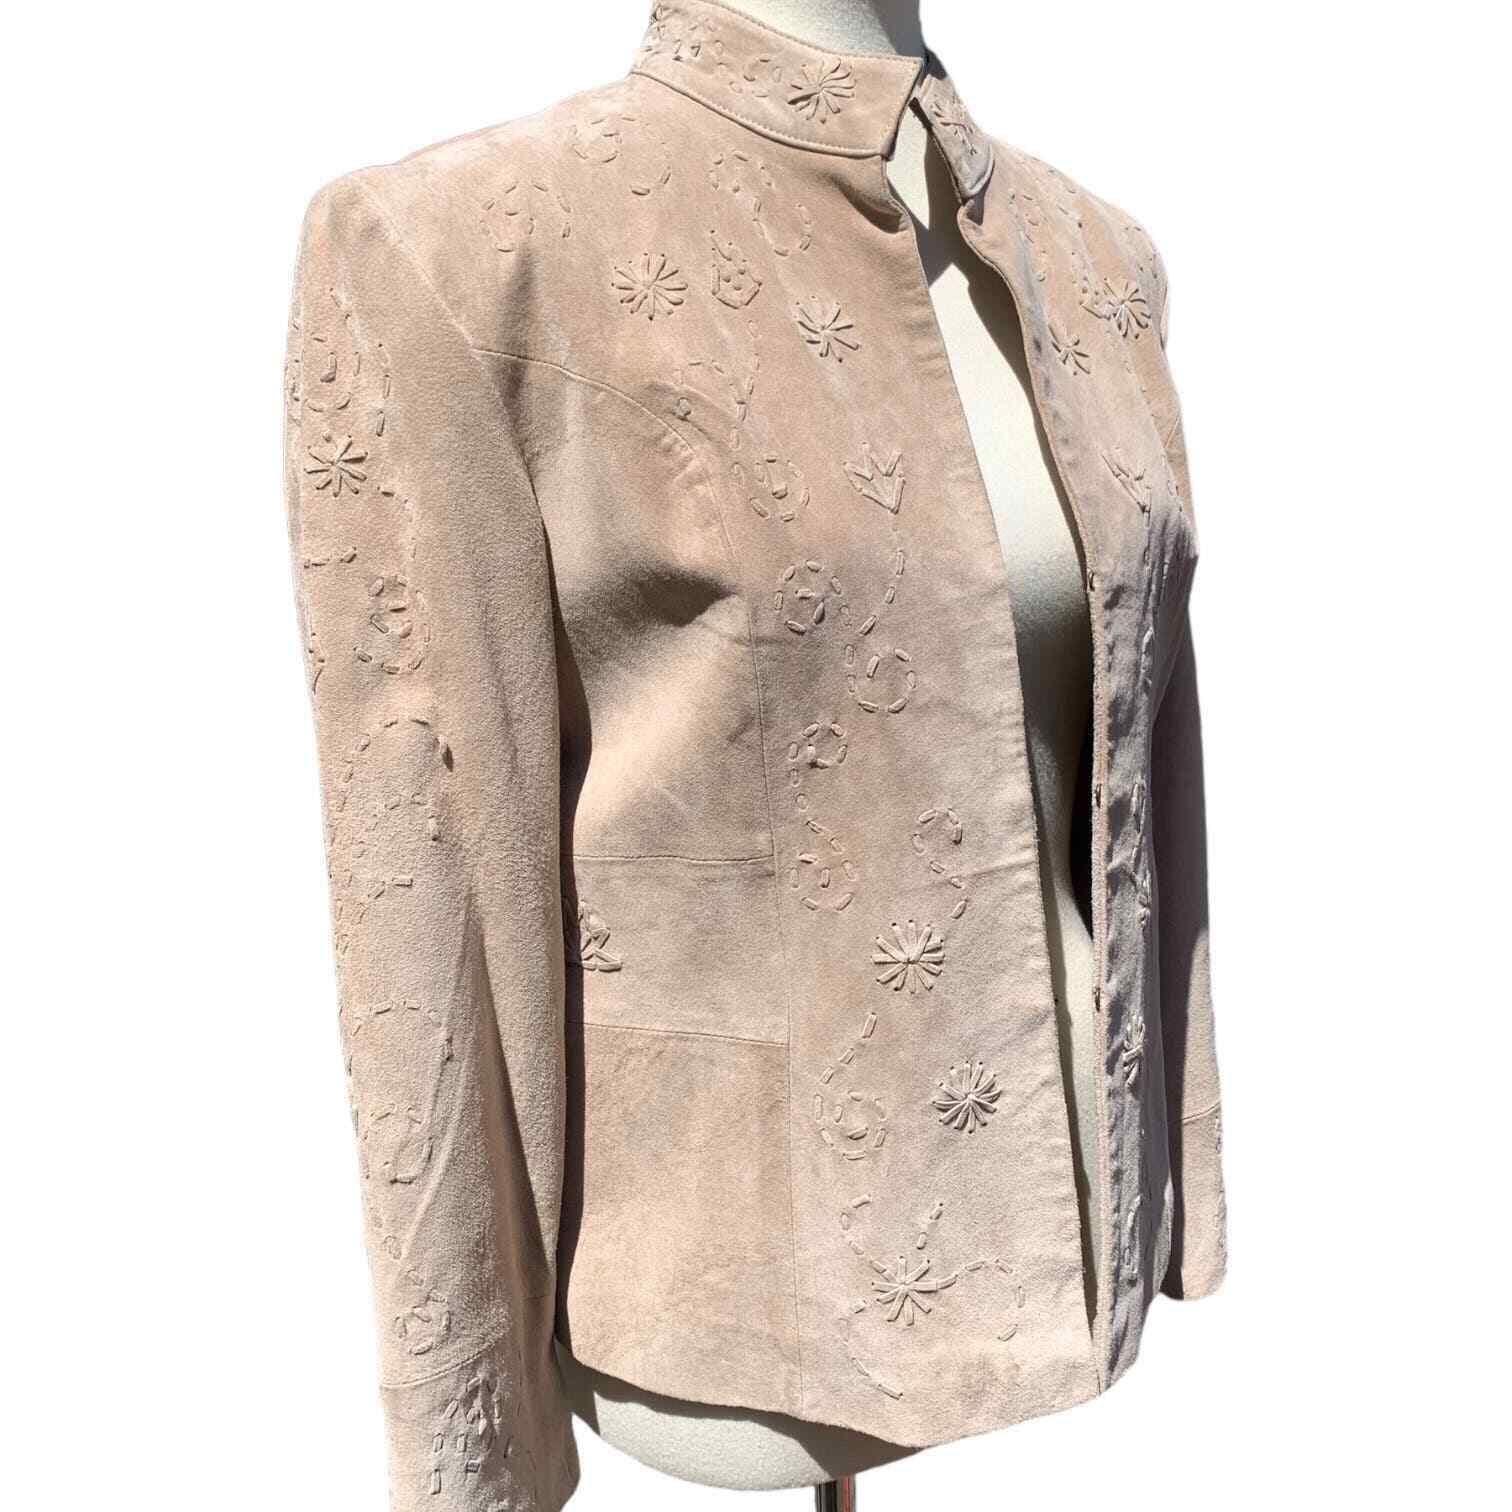 Coldwater Creek Tan Suede Leather Jacket - image 9